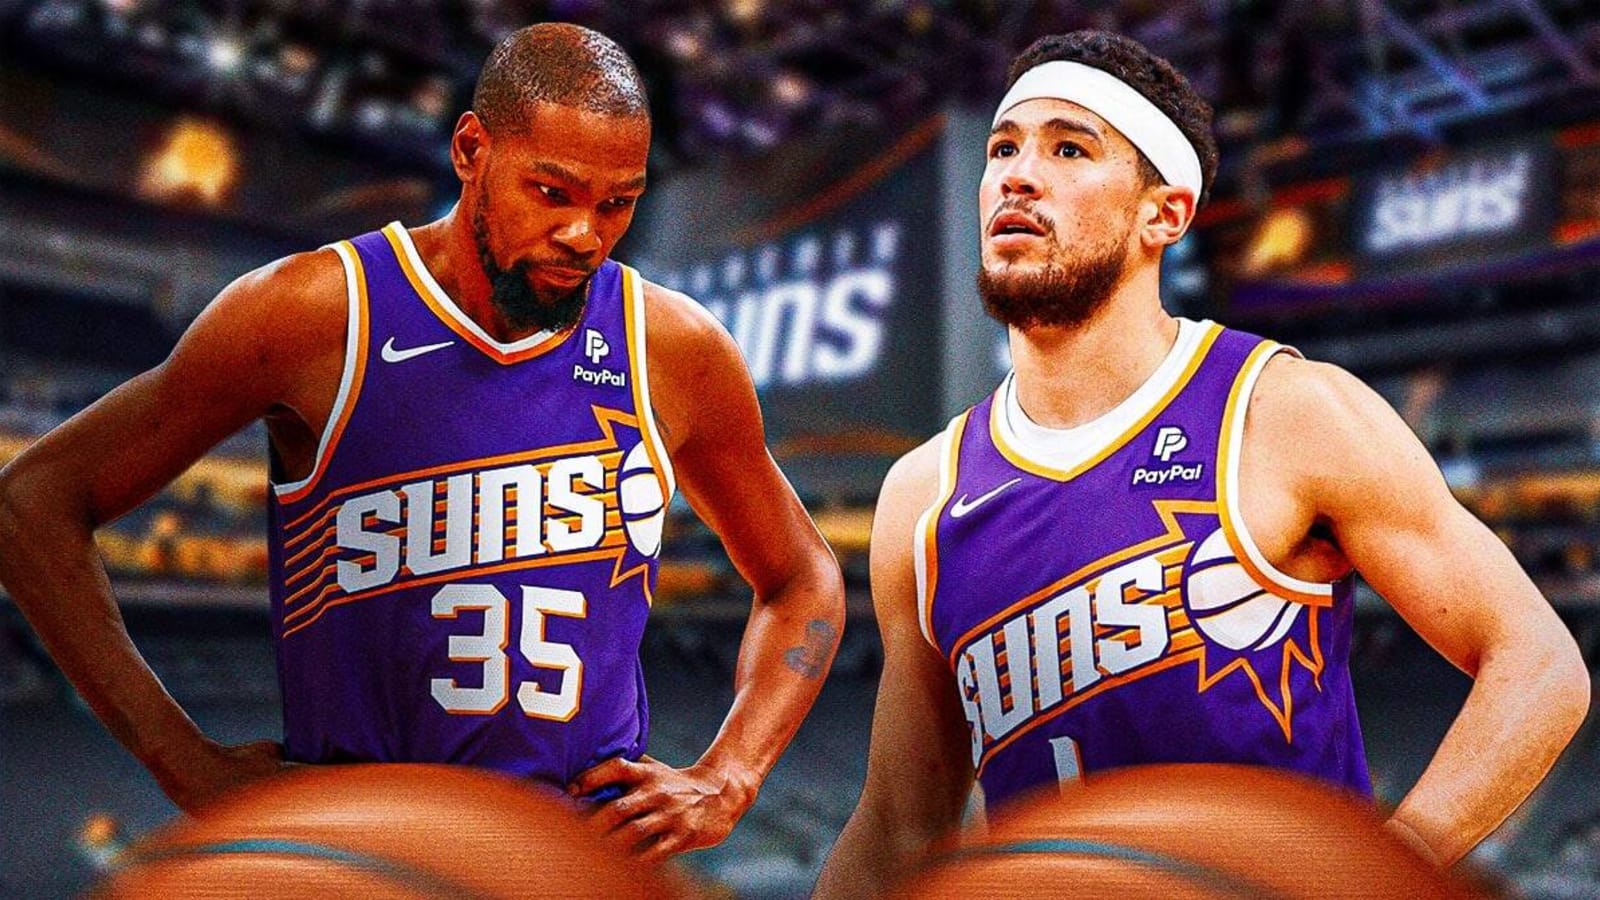 Why Suns are in a ‘crisis’ ahead of NBA playoffs, per Zach Lowe